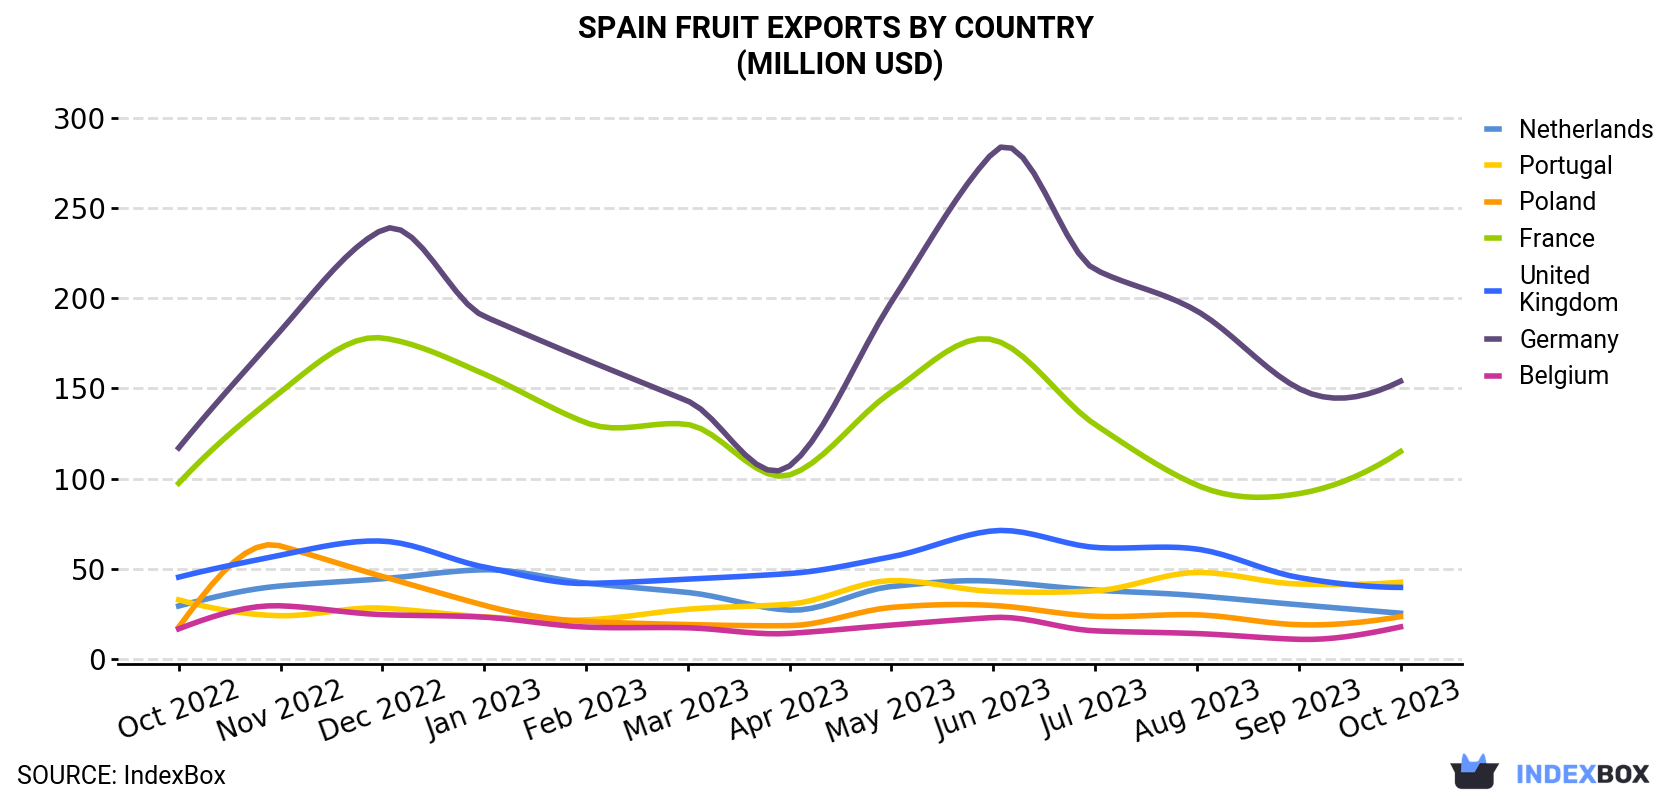 Spain Fruit Exports By Country (Million USD)